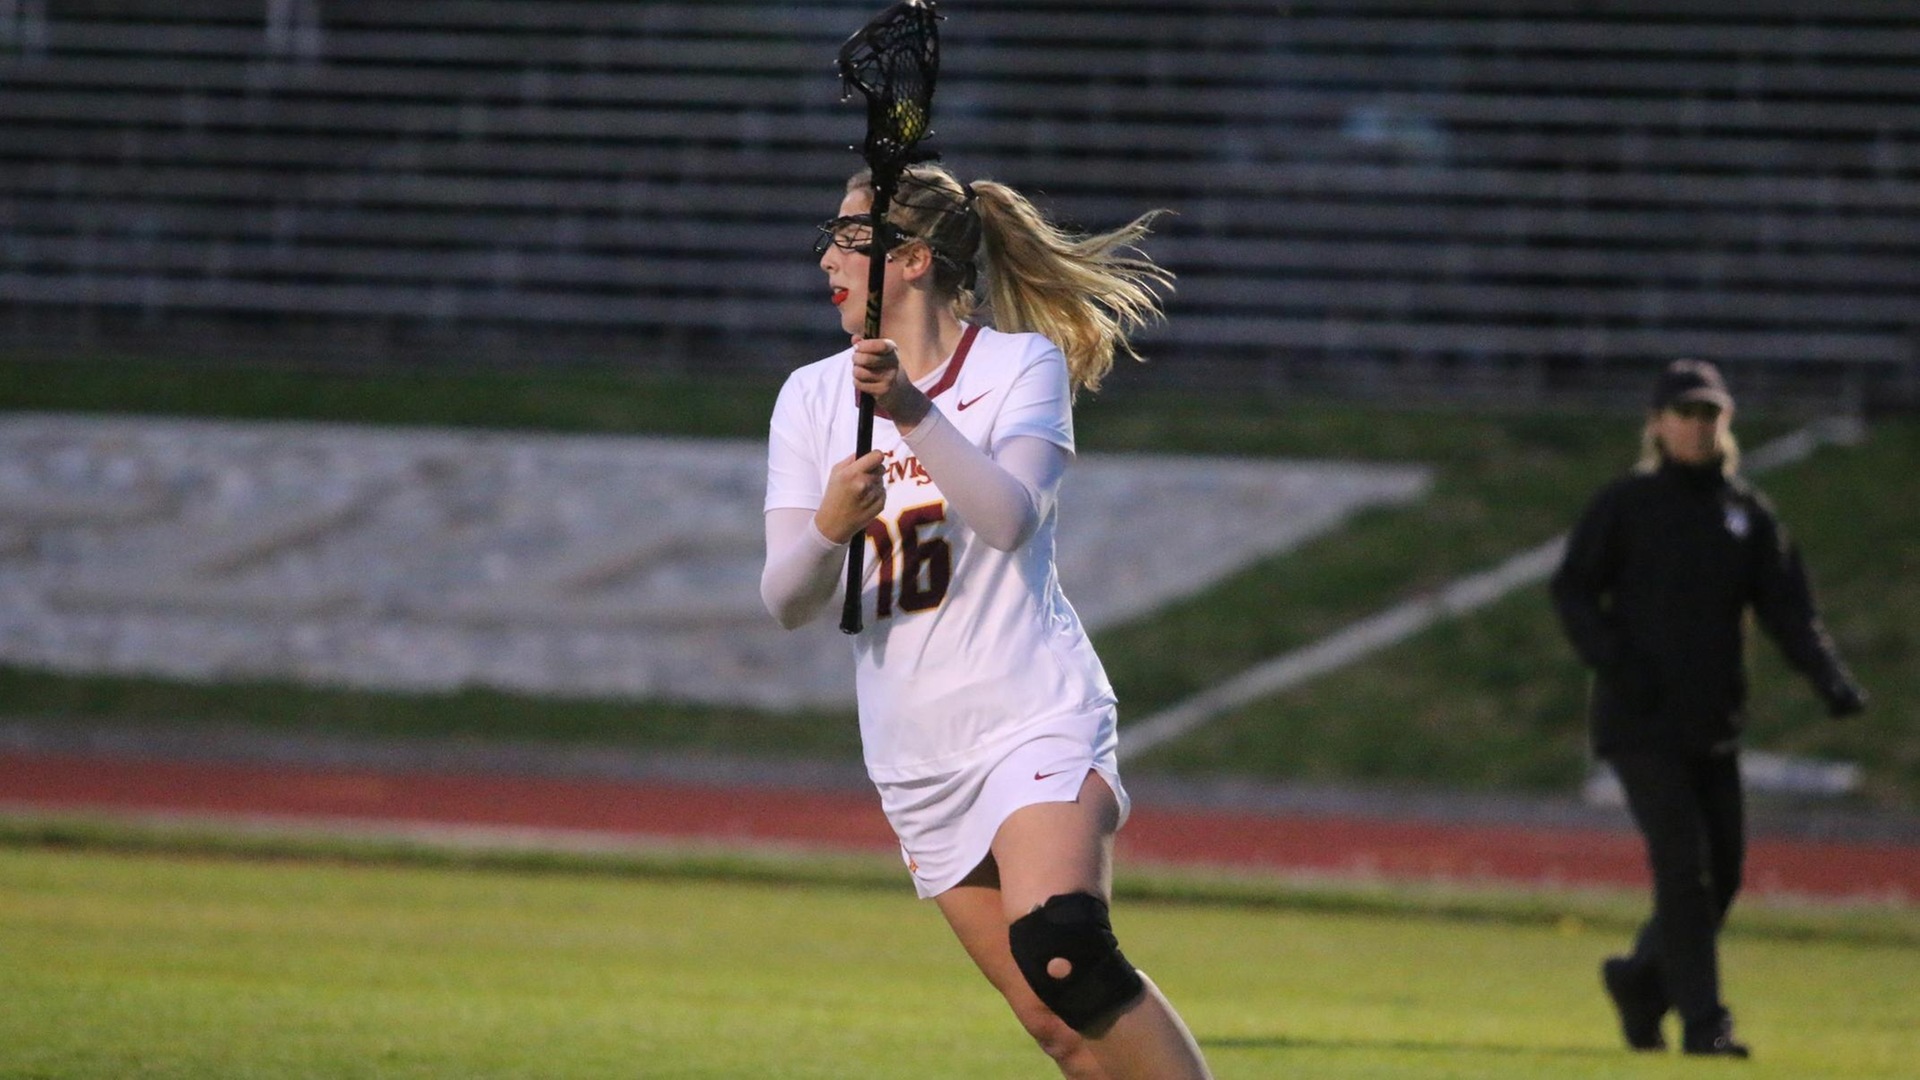 Abby Parrish was one of 7 Athenas on the IWLCA Honor Roll